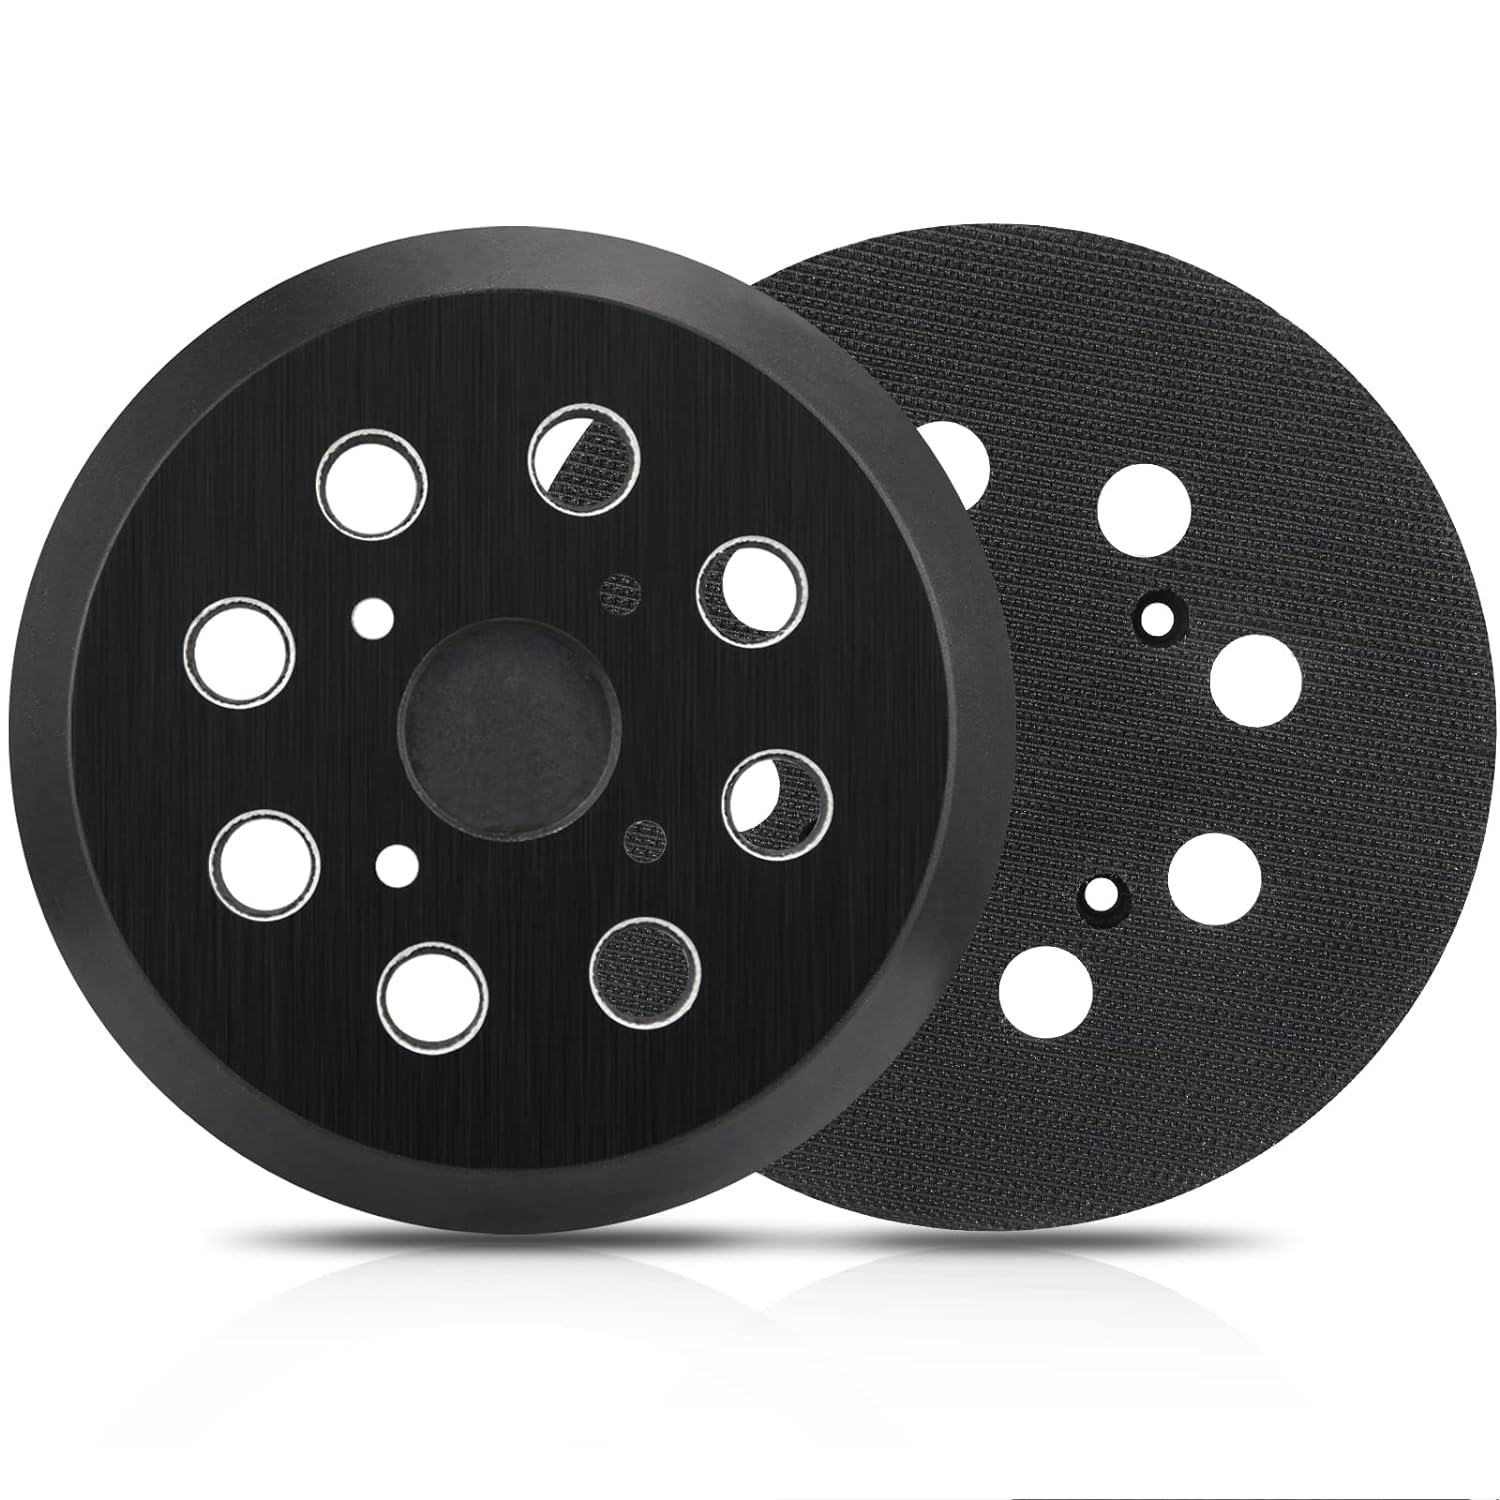 Generic Sander Replacement Pad for Ryobi, 2 Pack 5 in 8 Hole Hook and Loop Orbital Sanding Pad Parts for Ryobi RS290 RS280 P411 Milwauk